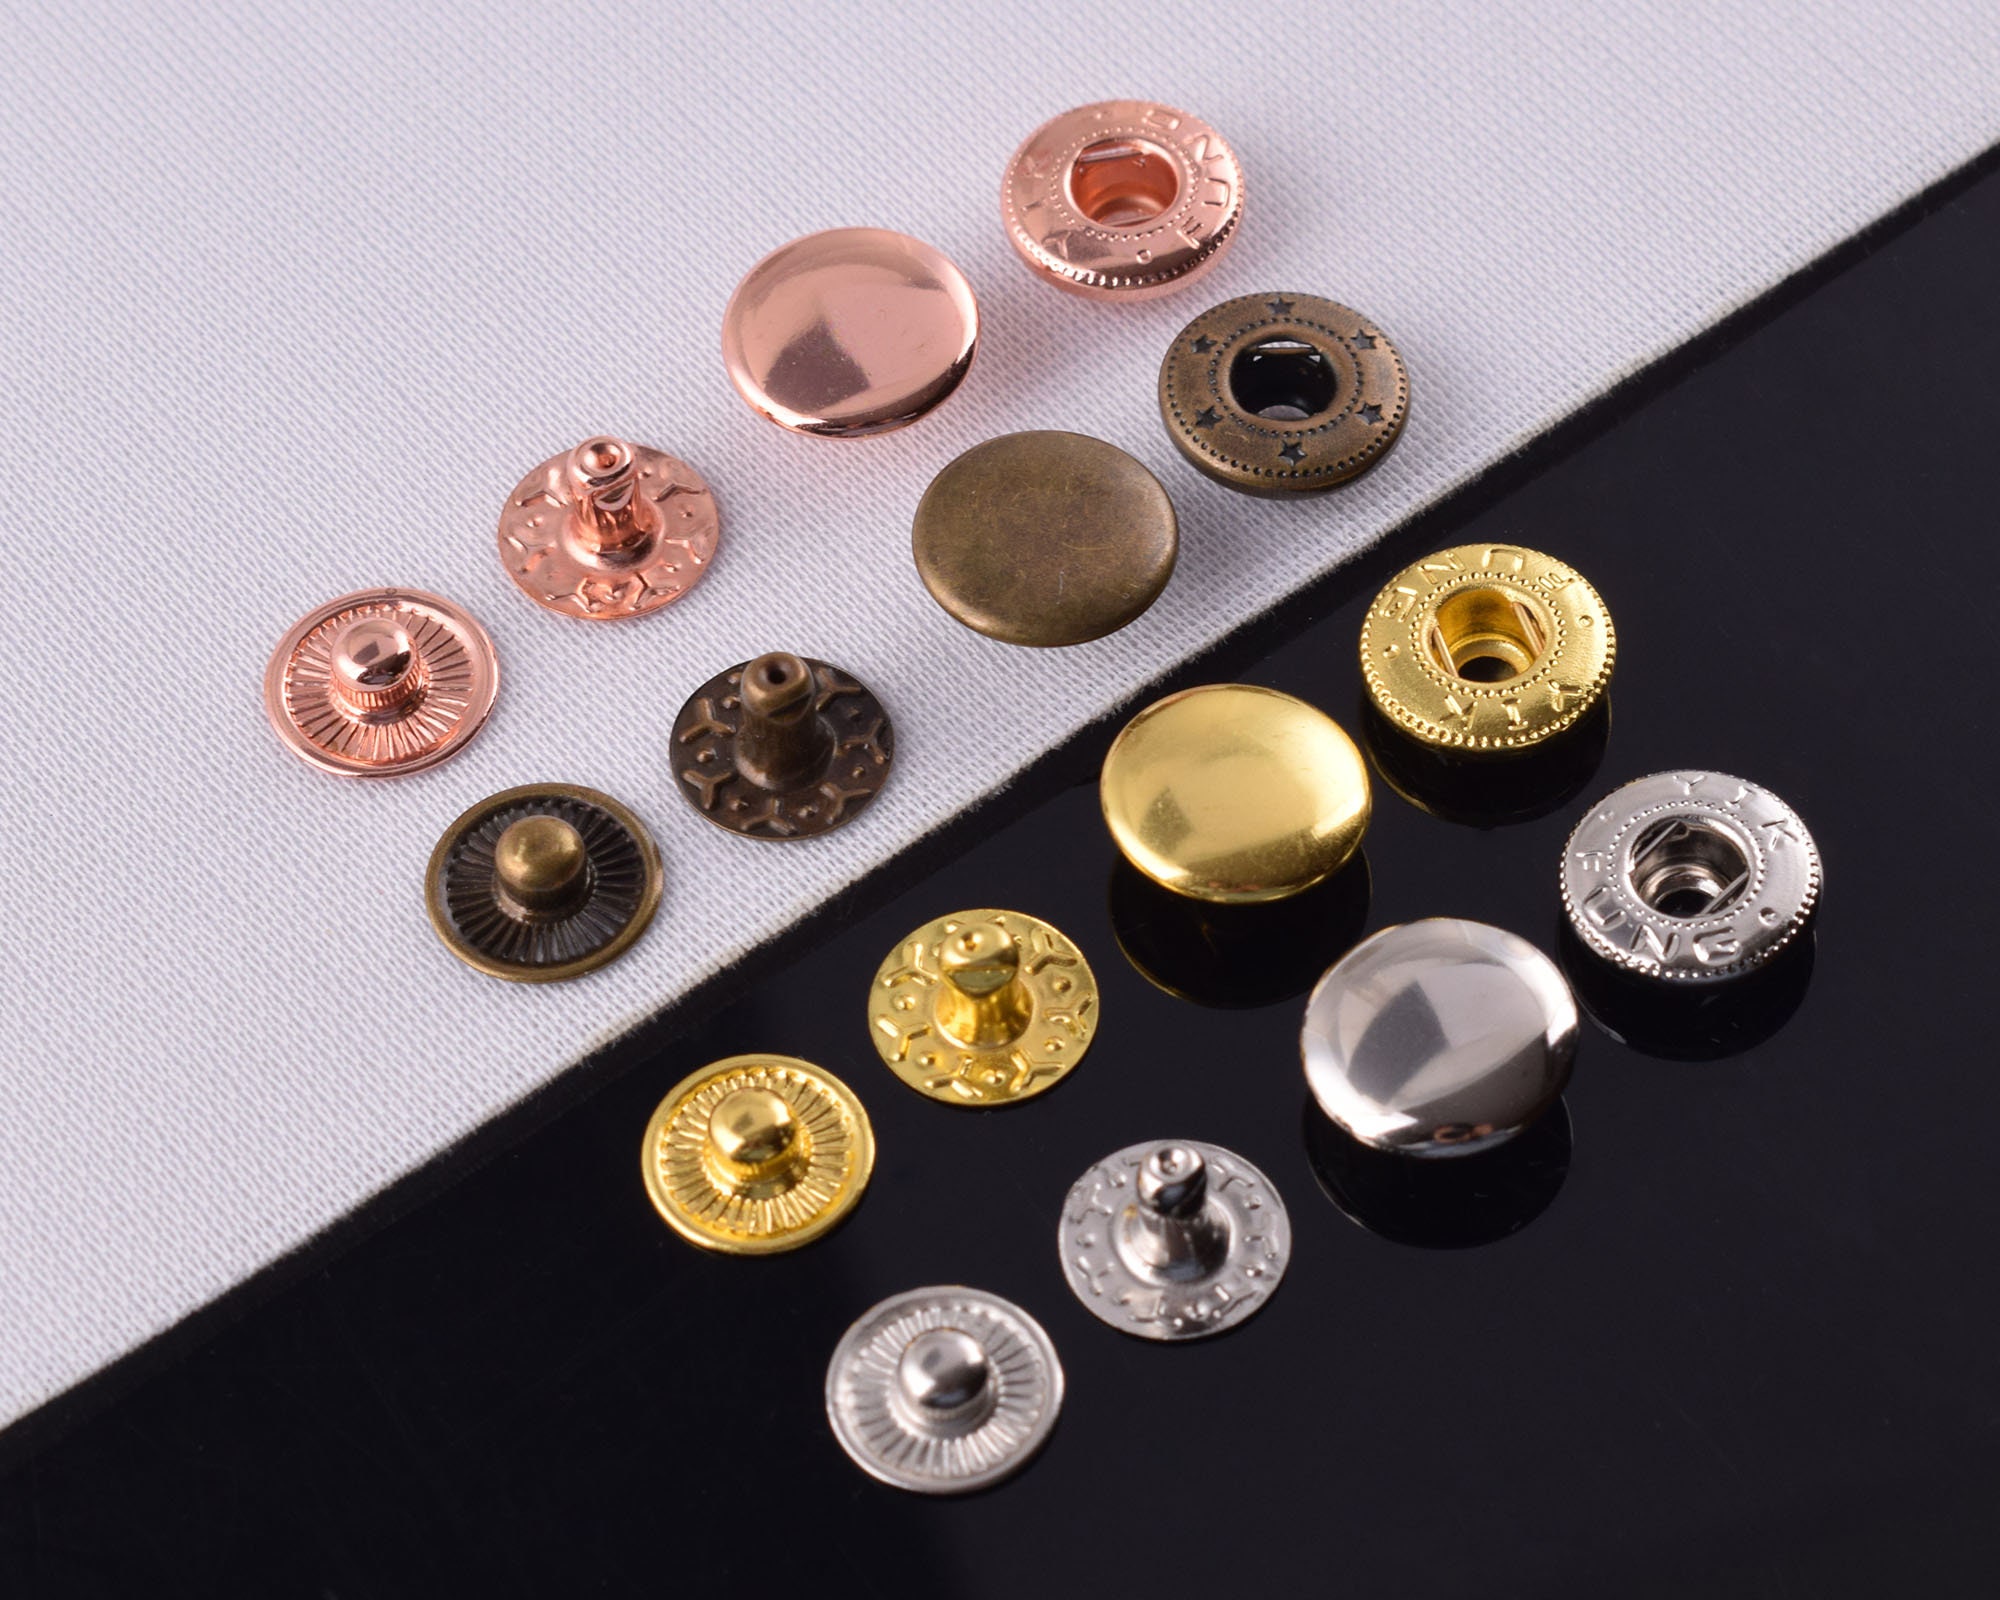 Metal Snap Fasteners Press Clothing Snaps Button 6 pcs on OnBuy